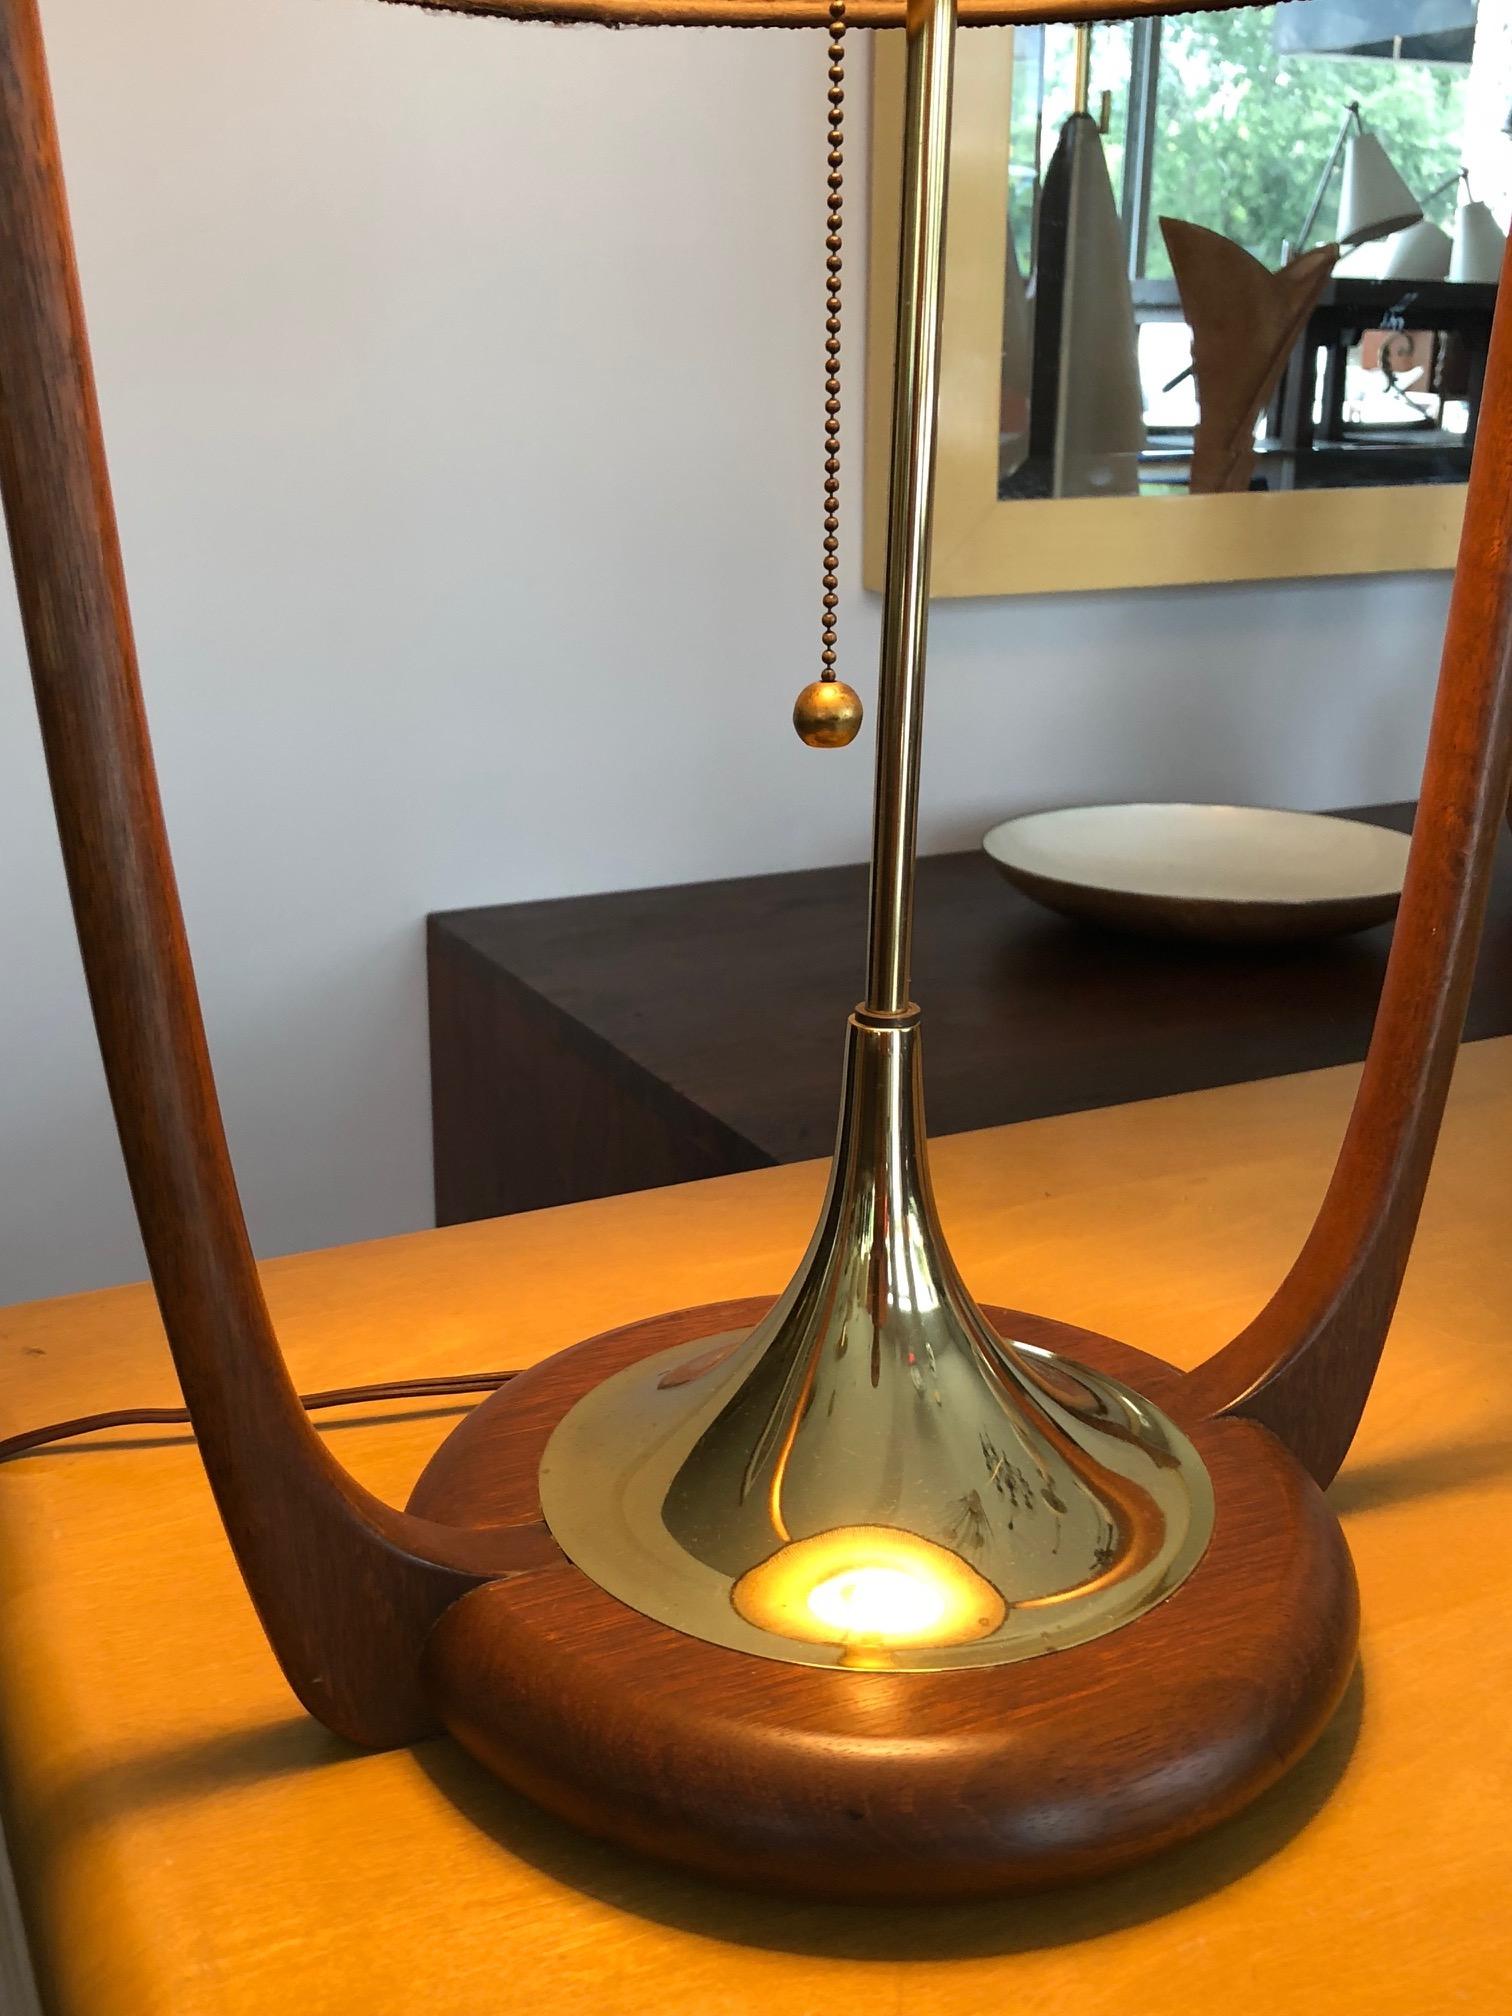 An unusual lamp by Modeline of California in hard to find excellent original condition. Walnut and brass details with original shade. The lap is tall at 43.5